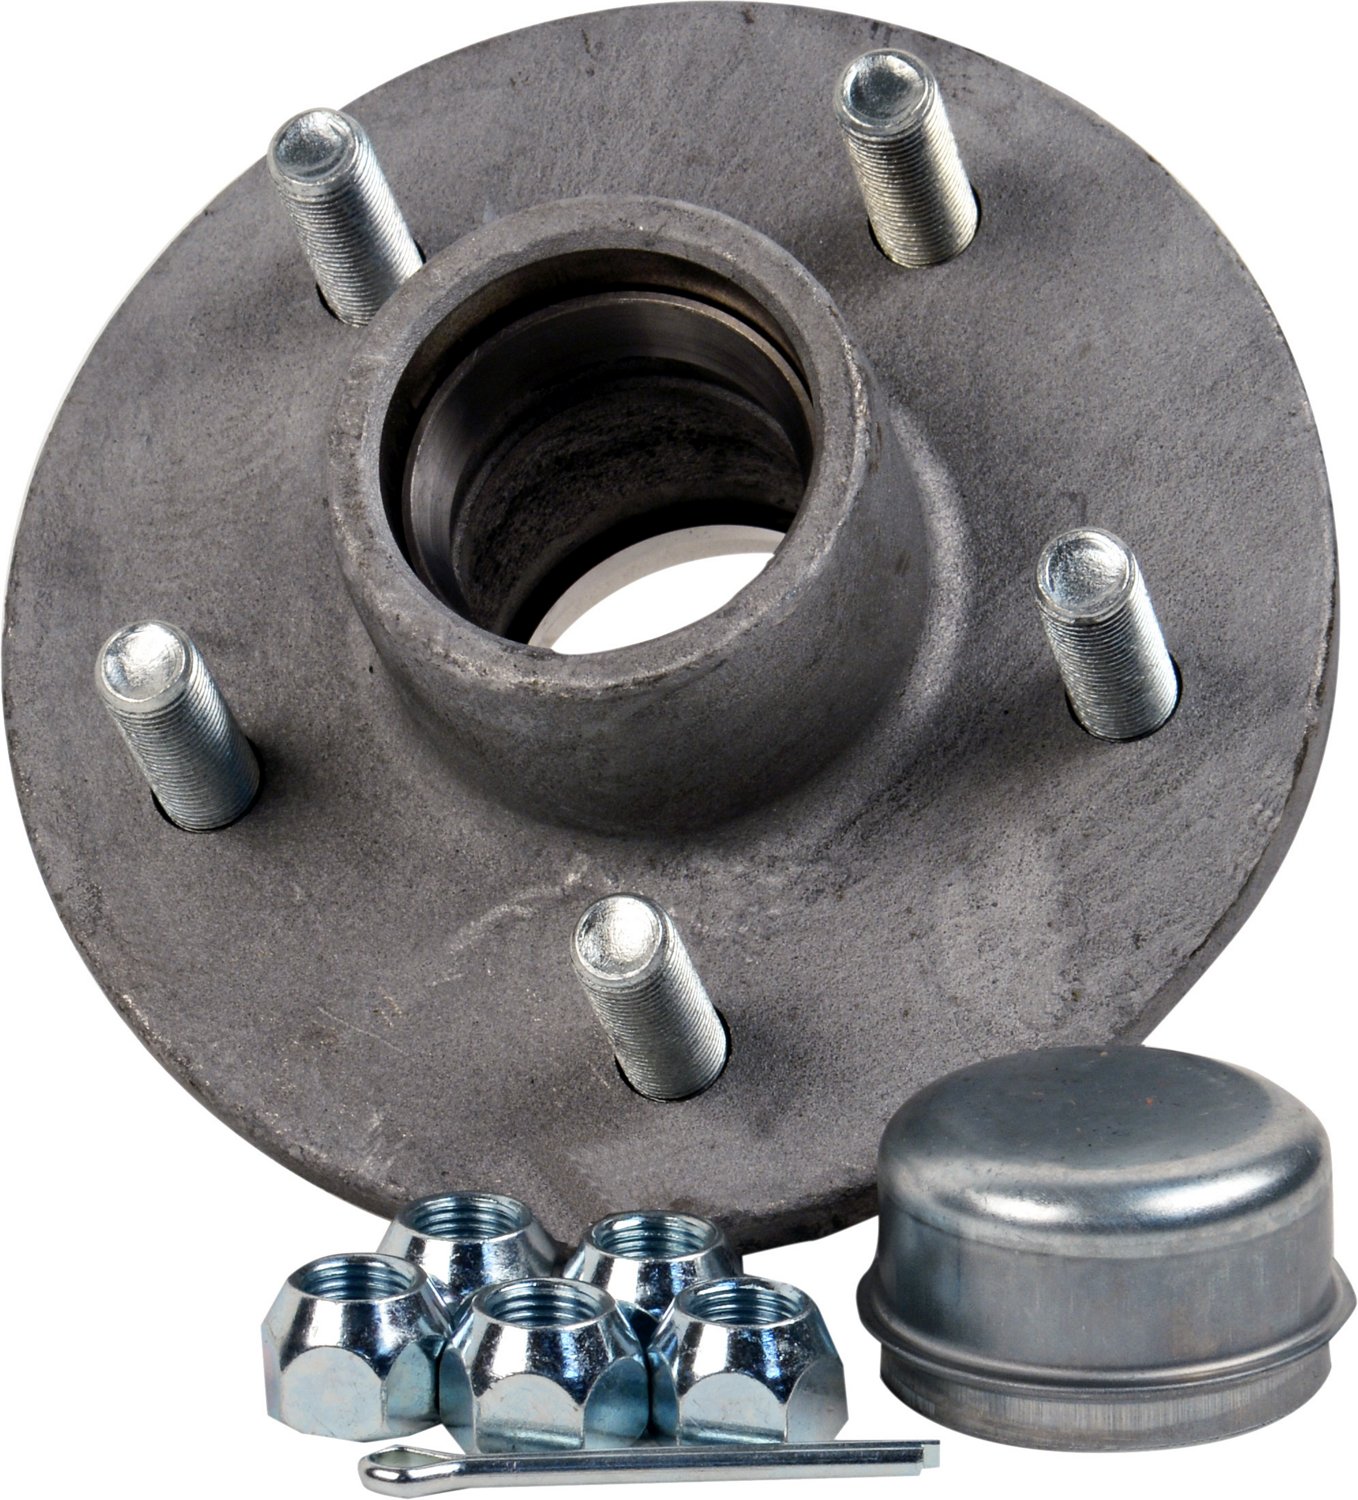 1-1/16" S CE SMITH TRAILER HUB KIT PACKAGE 1-3/8" 